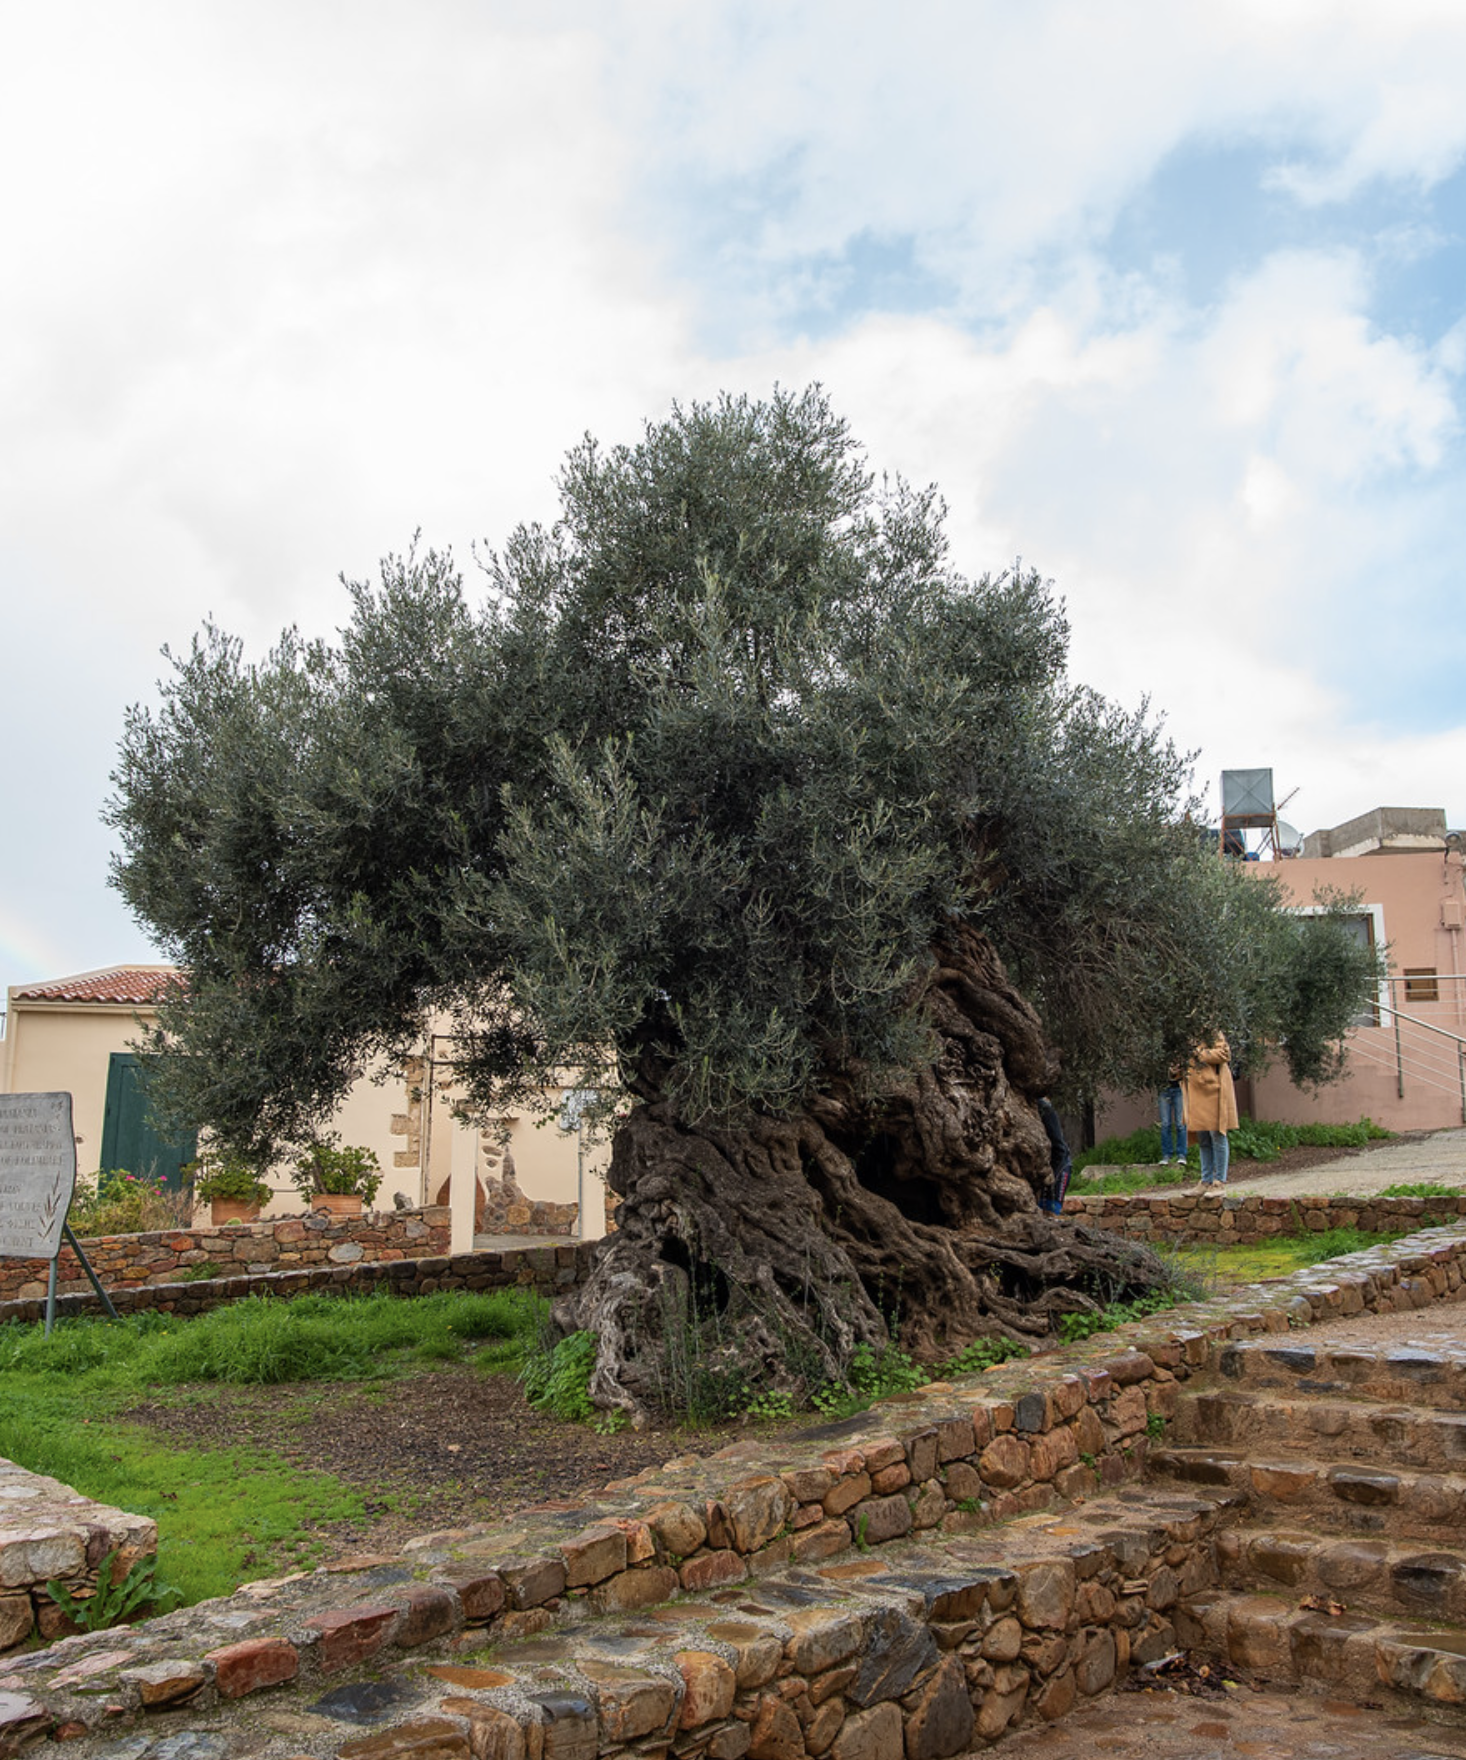 The World's Oldest Olive Tree in Crete, Greece.